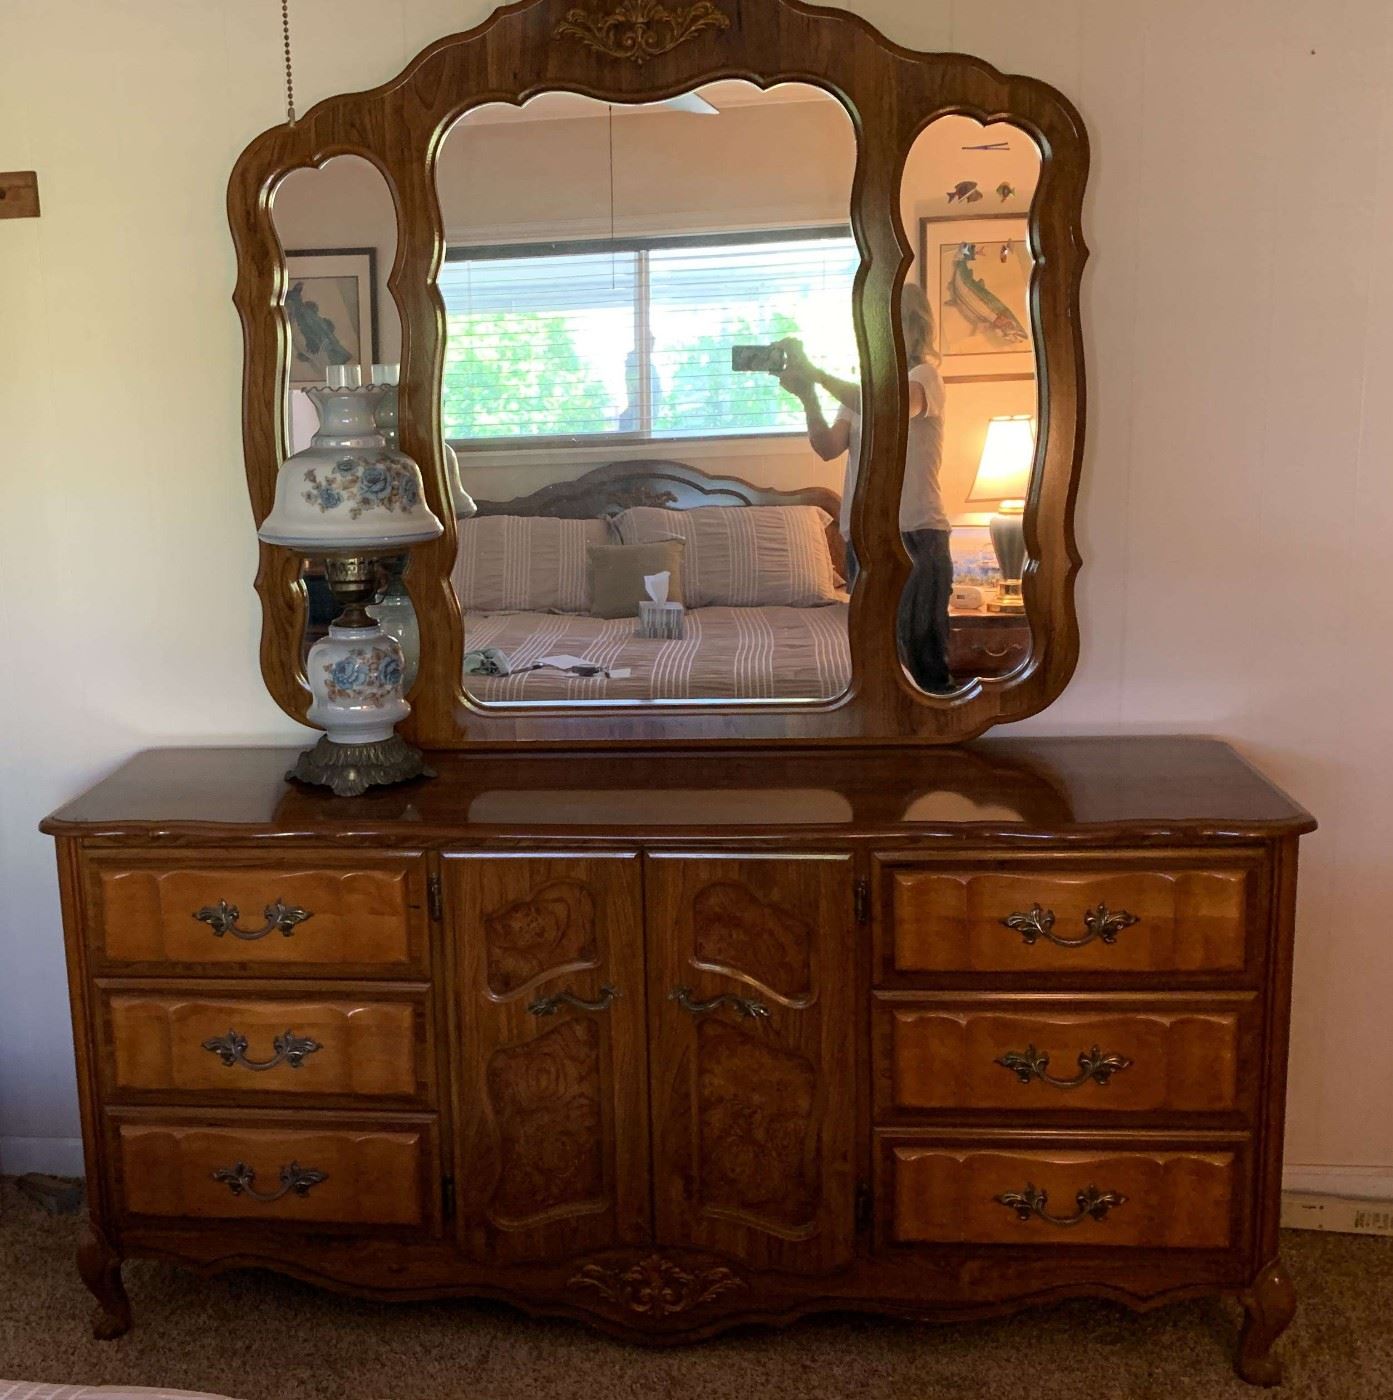 BE002VDresser With Mirror, Vintage Lamp